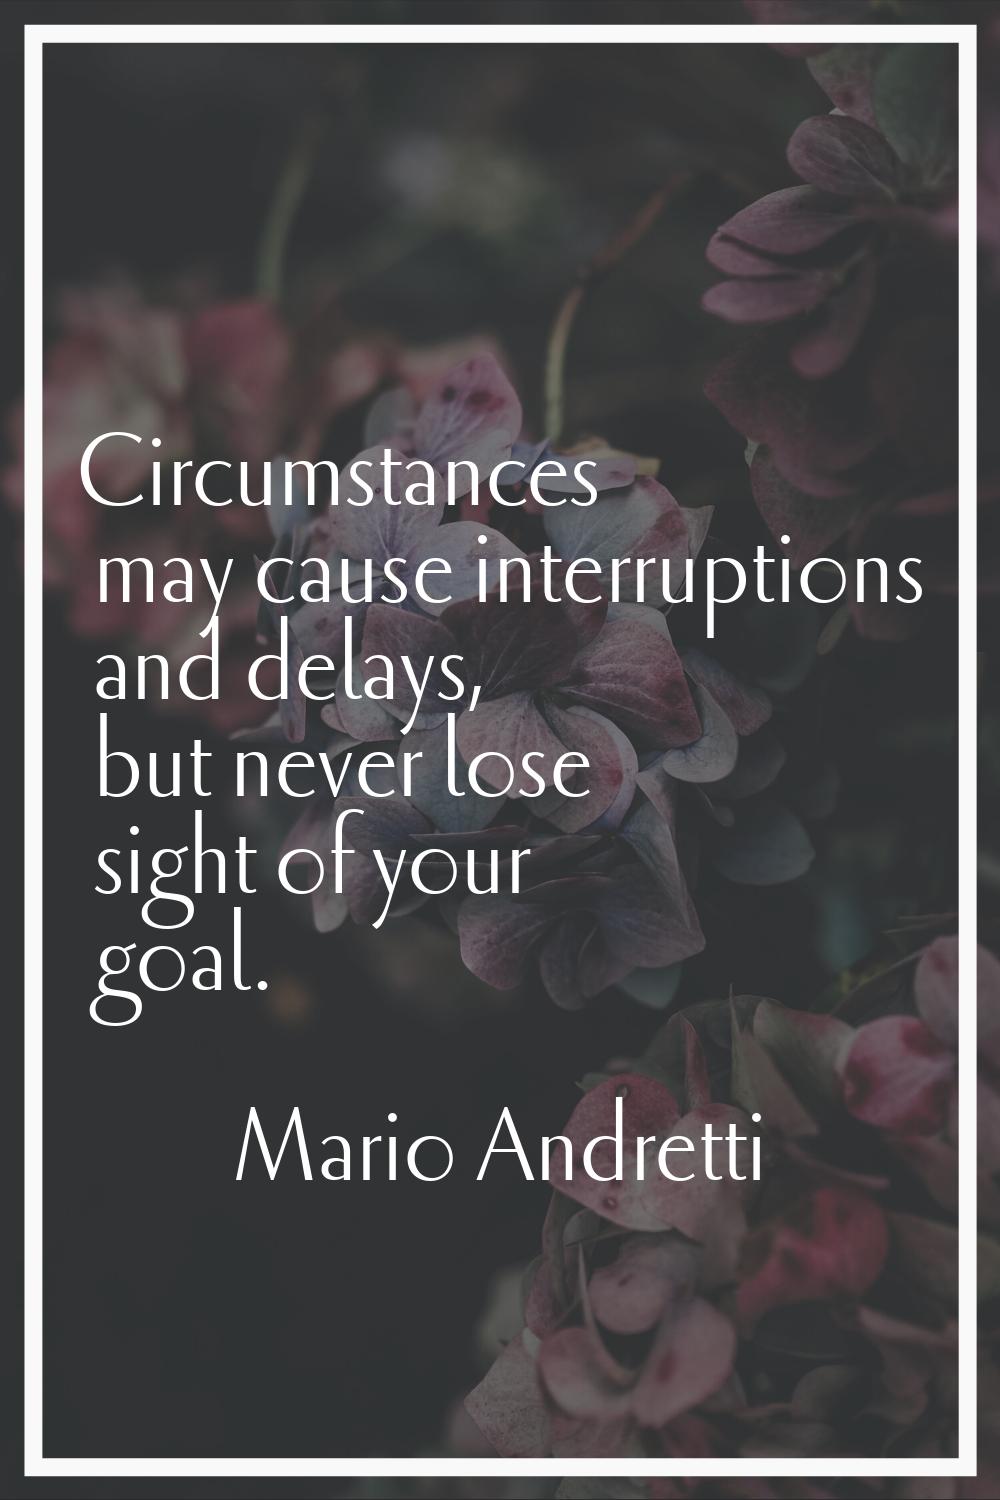 Circumstances may cause interruptions and delays, but never lose sight of your goal.